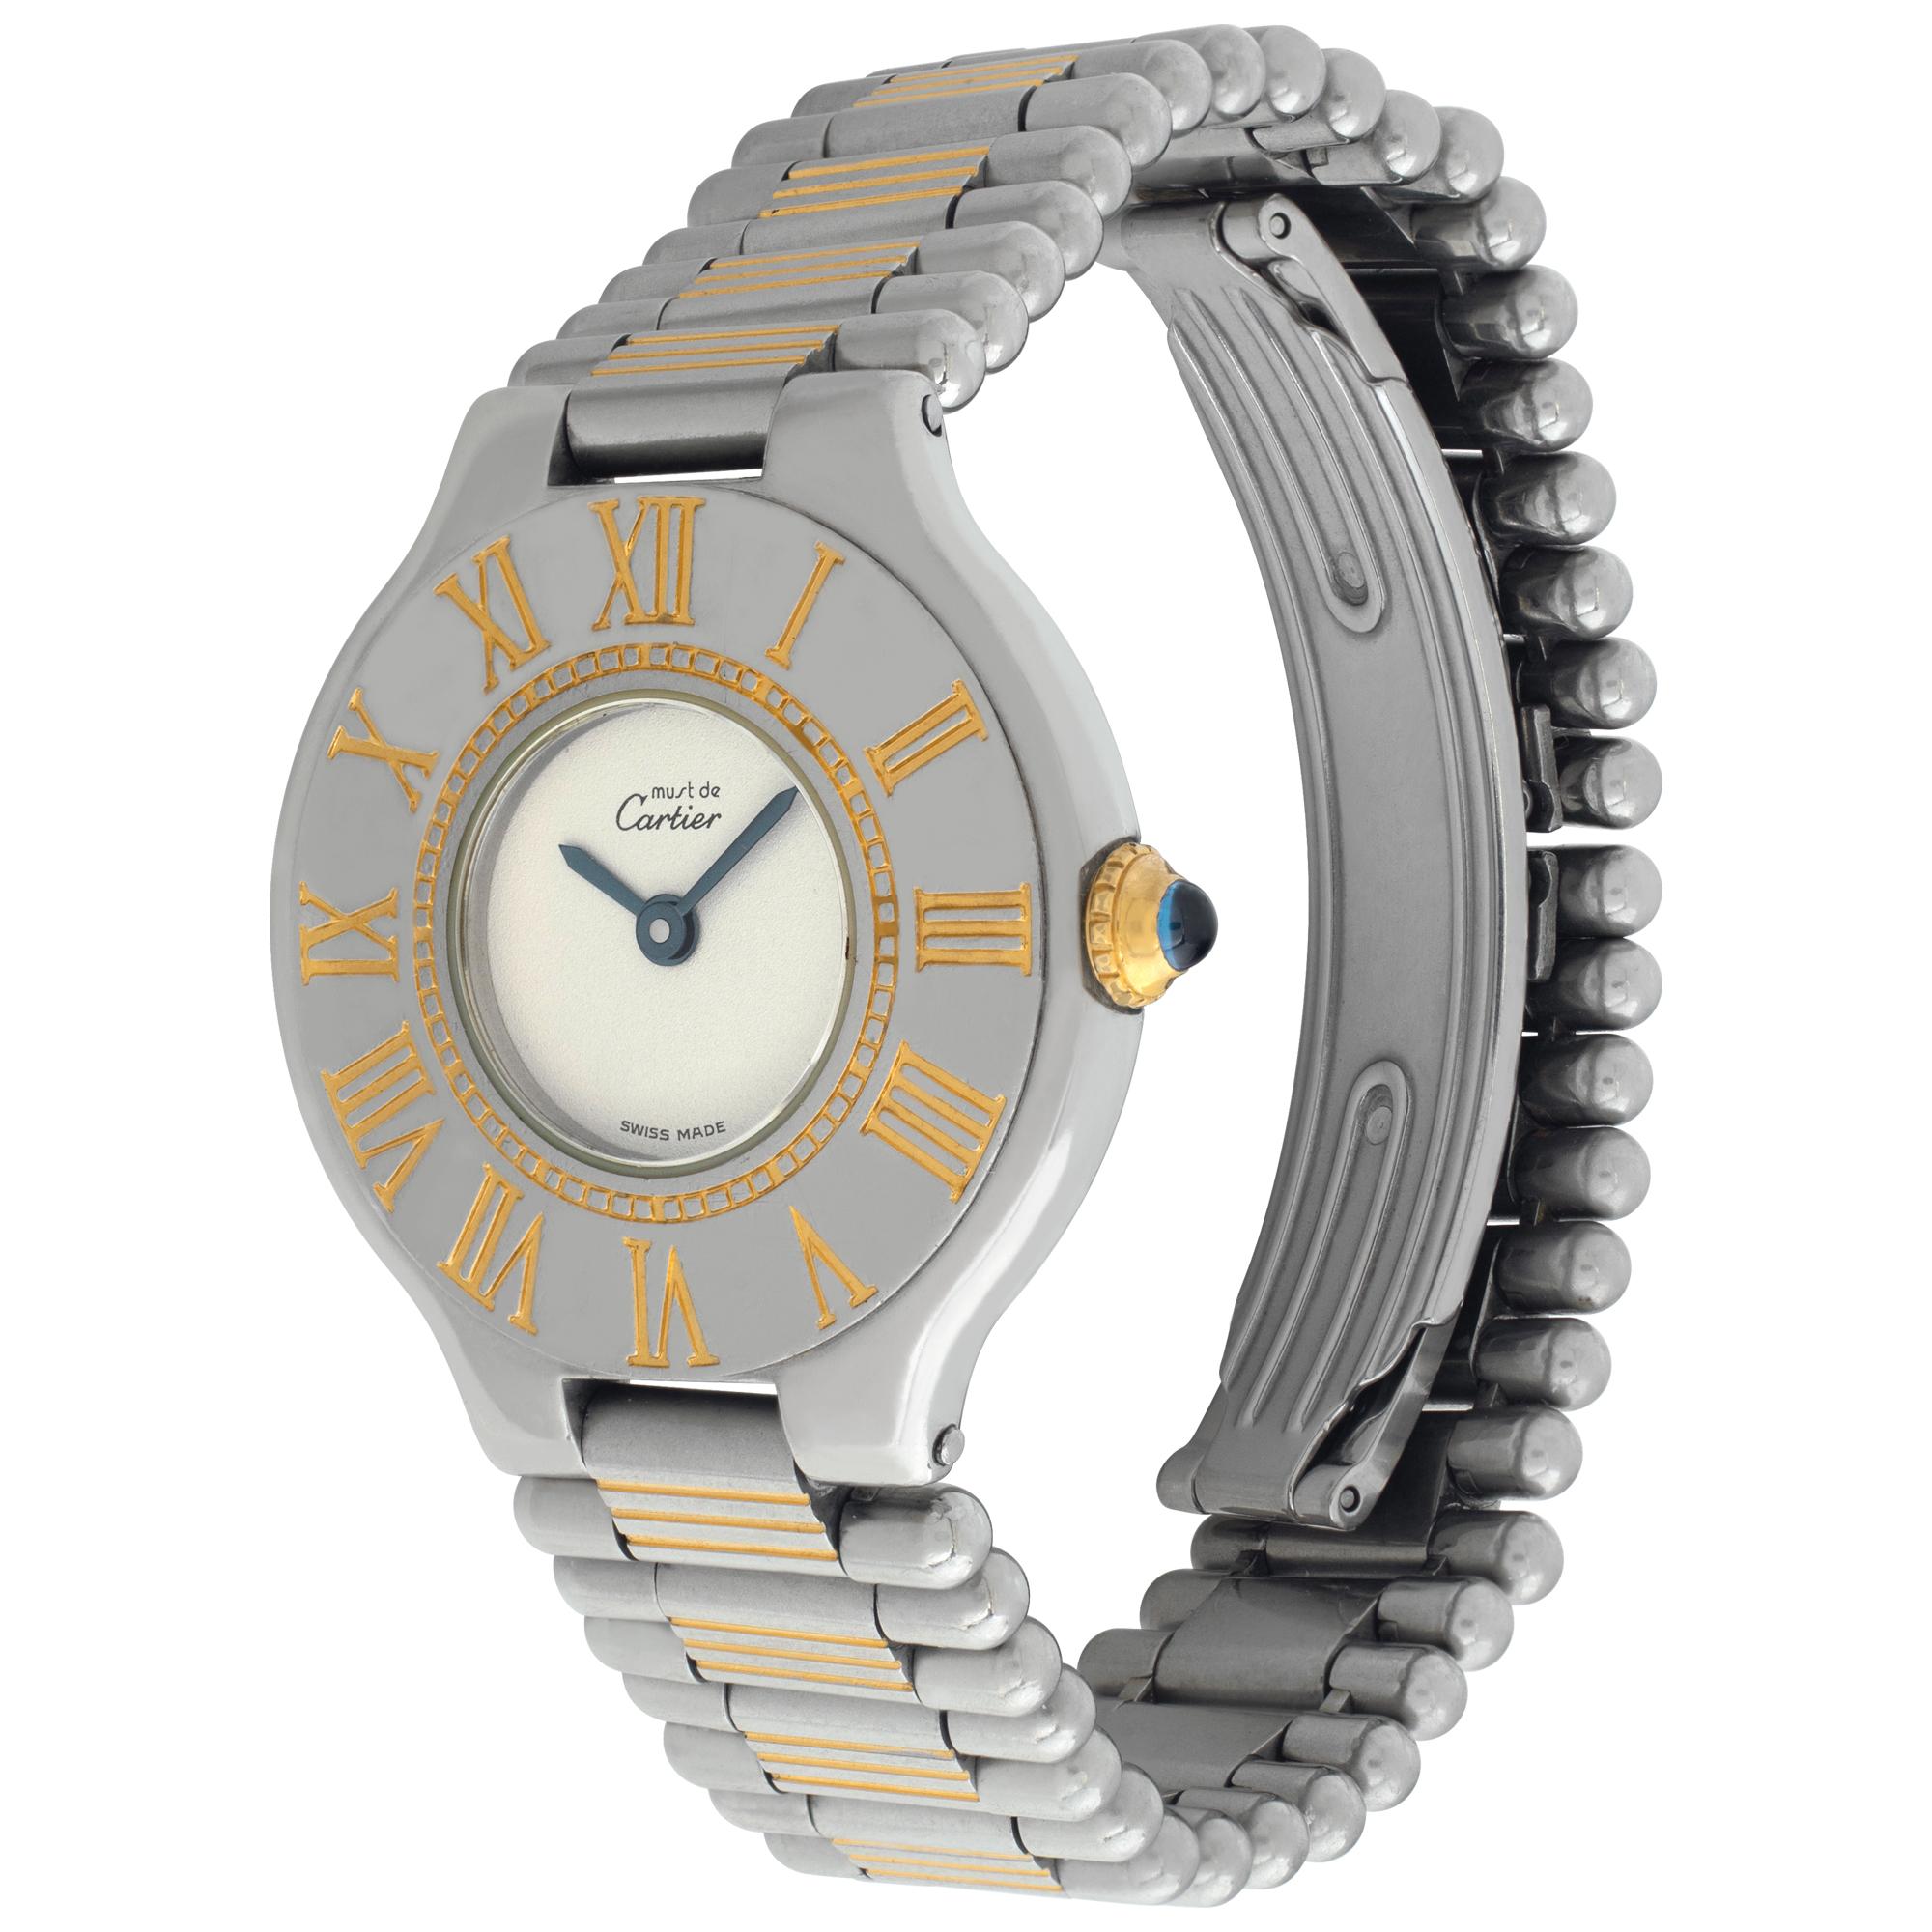 Cartier Must 21 in stainless steel & gold plate. Quartz. 28 mm case size. Circa 1990s. Fine Pre-owned Cartier Watch. Certified preowned Vintage Cartier Must 21 watch is made out of Stainless steel on a Stainless Steel & Gold Plated bracelet with a